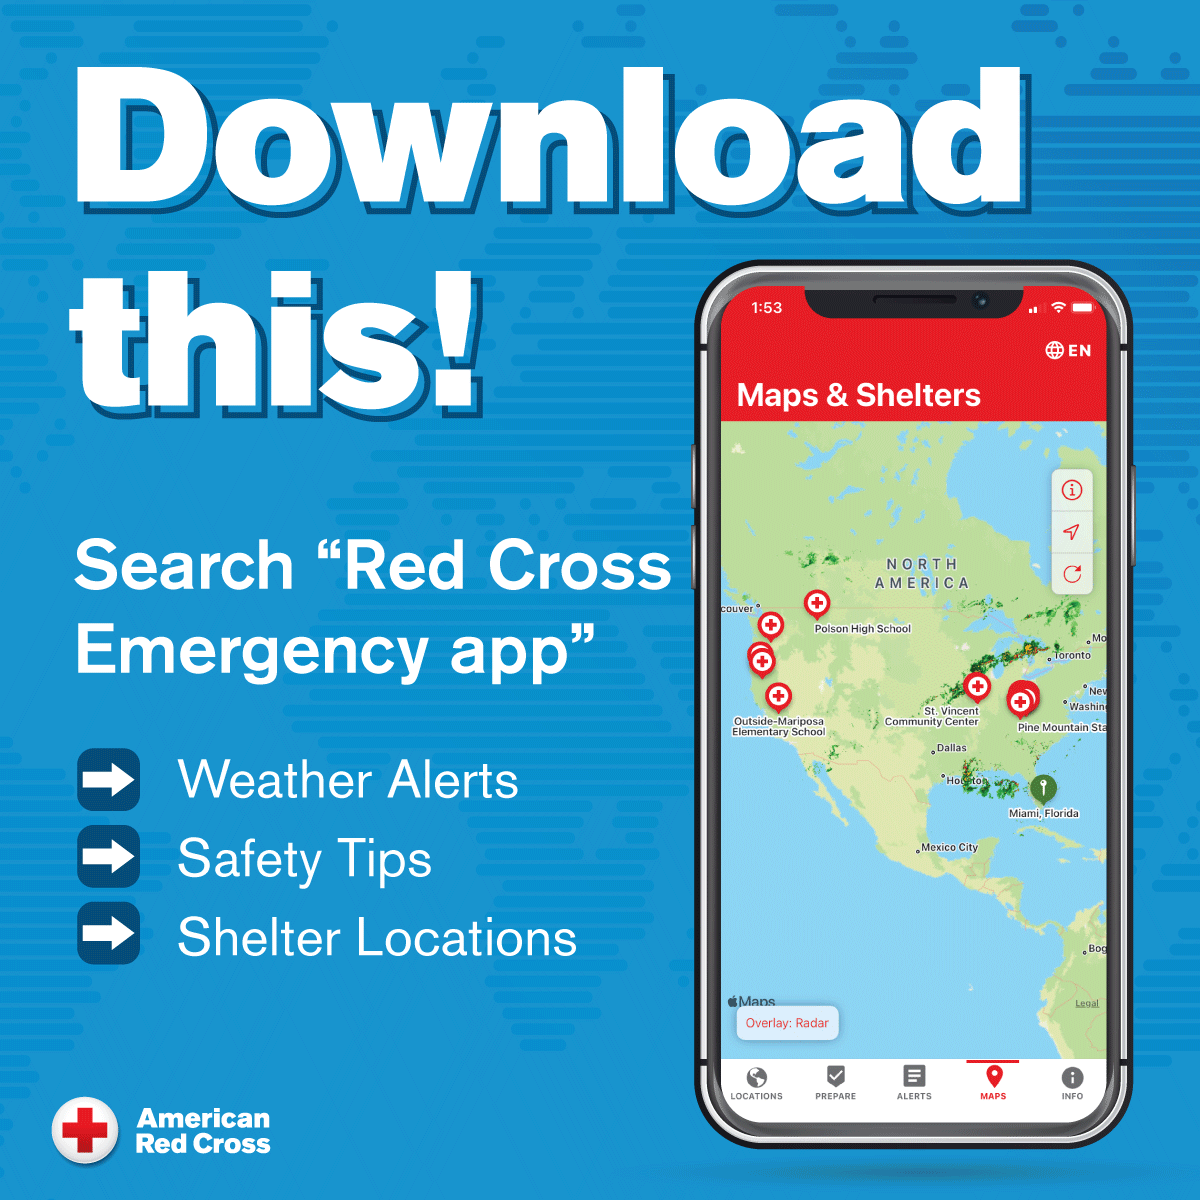 Download the Red Cross emergency app